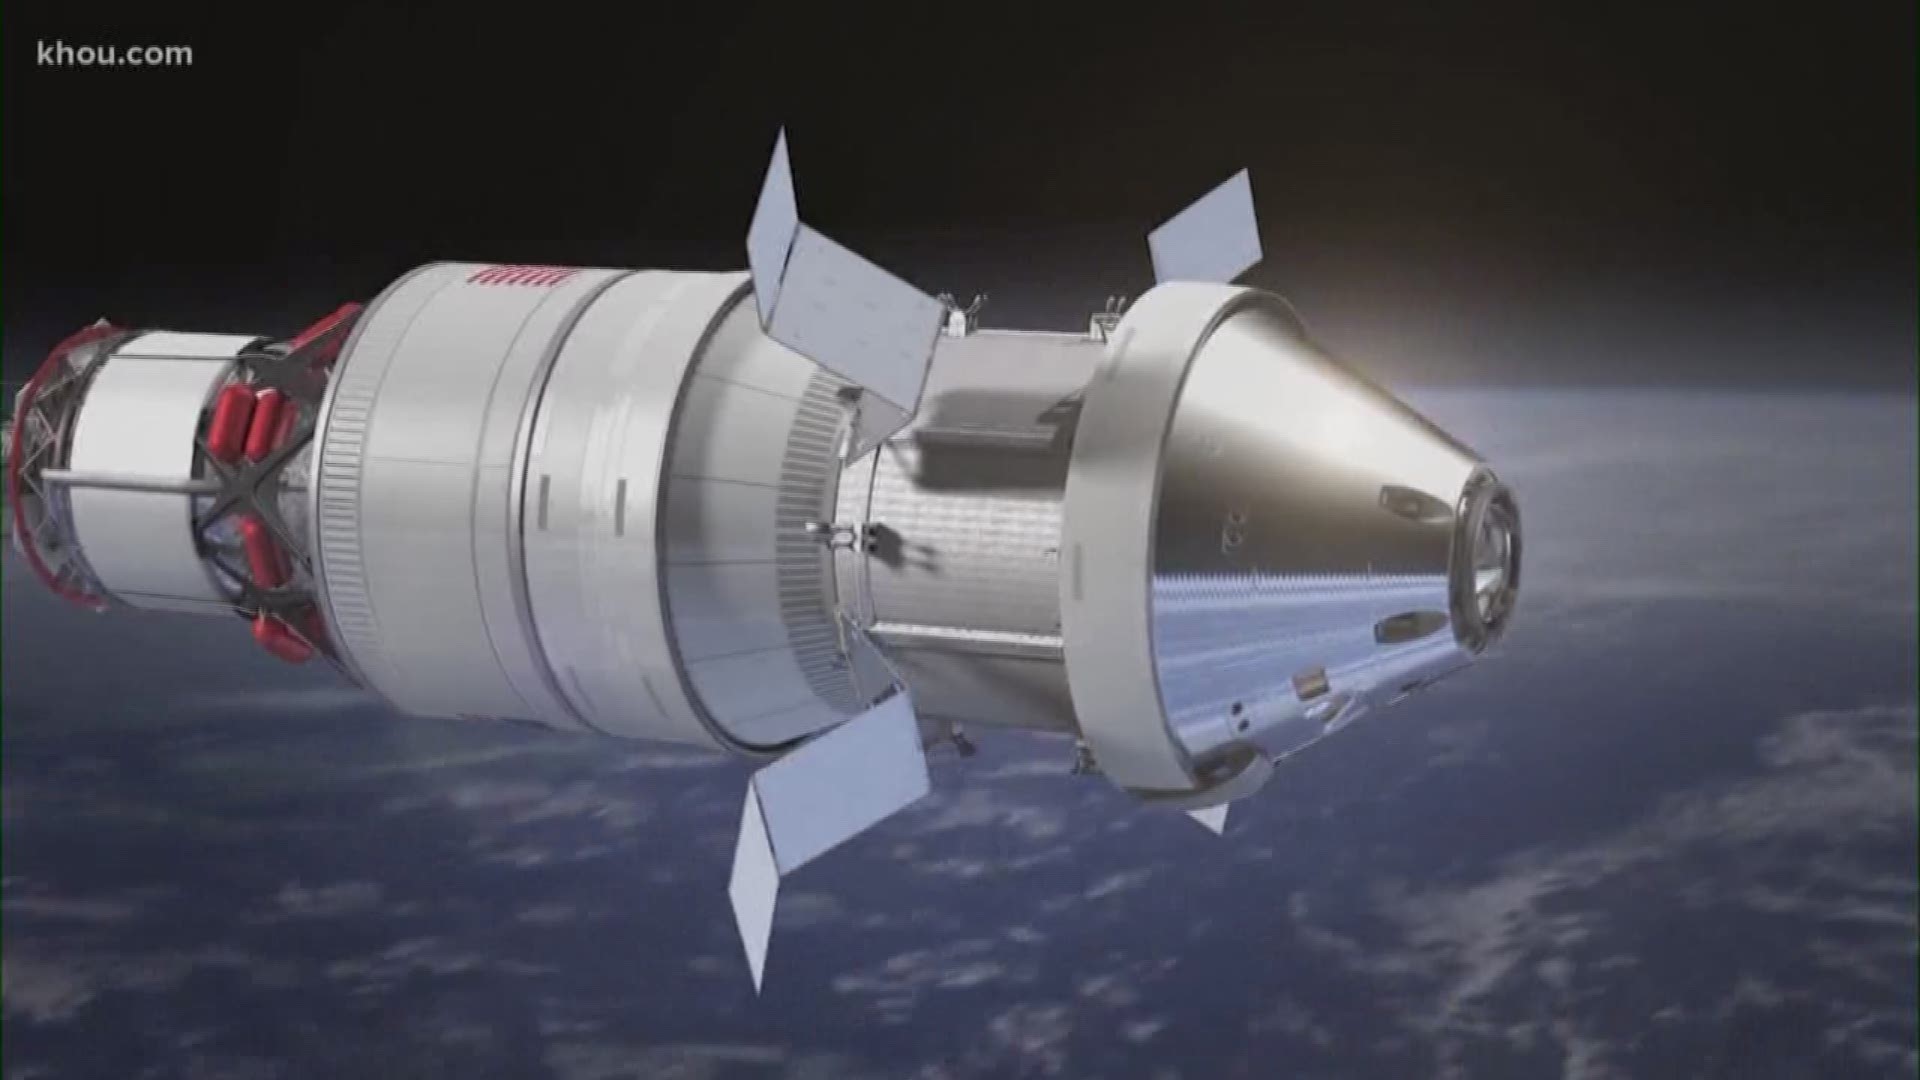 NASA tested its Orion capsule they hope to use to send humans back to the moon.